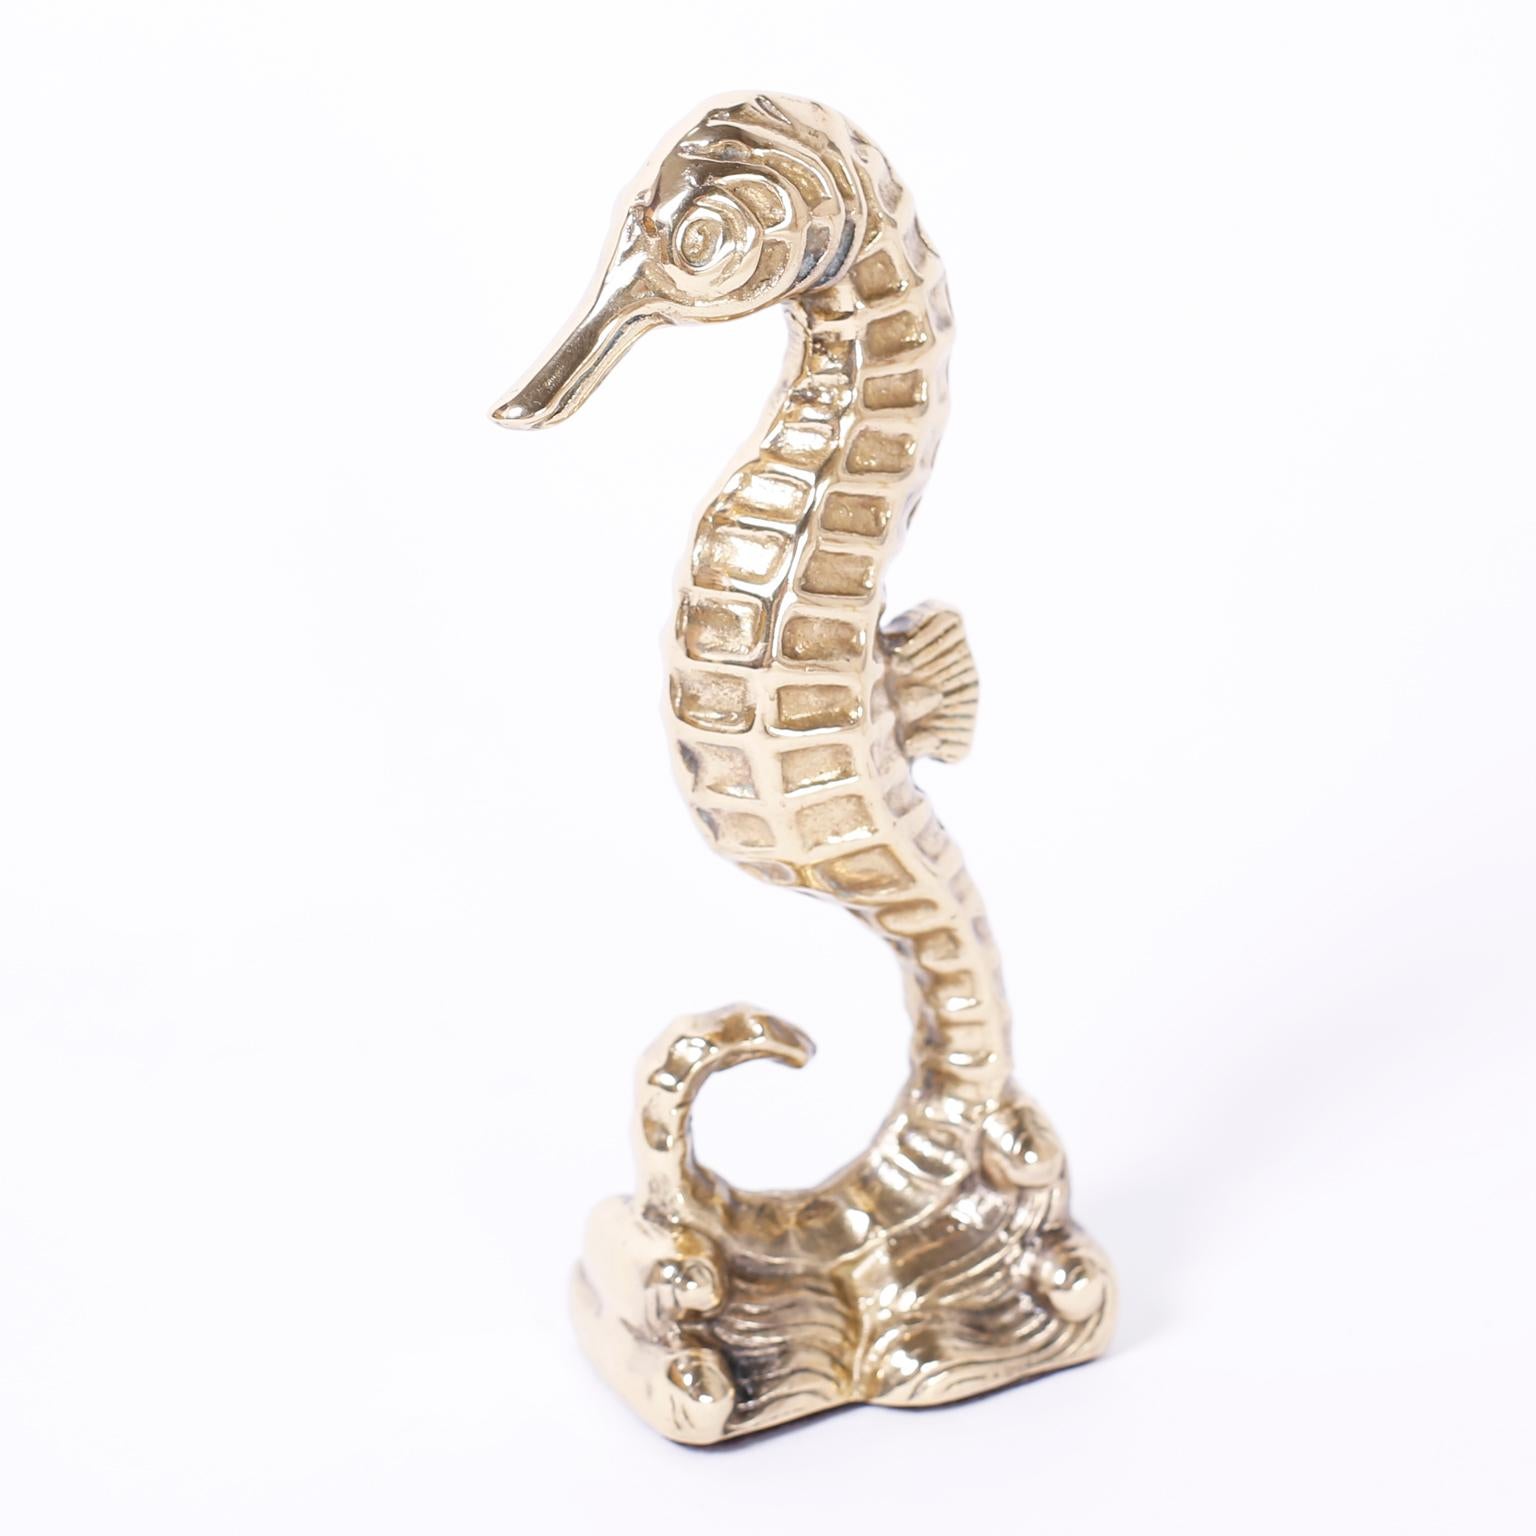 British Colonial Pair of Vintage Brass Seahorse Bookends